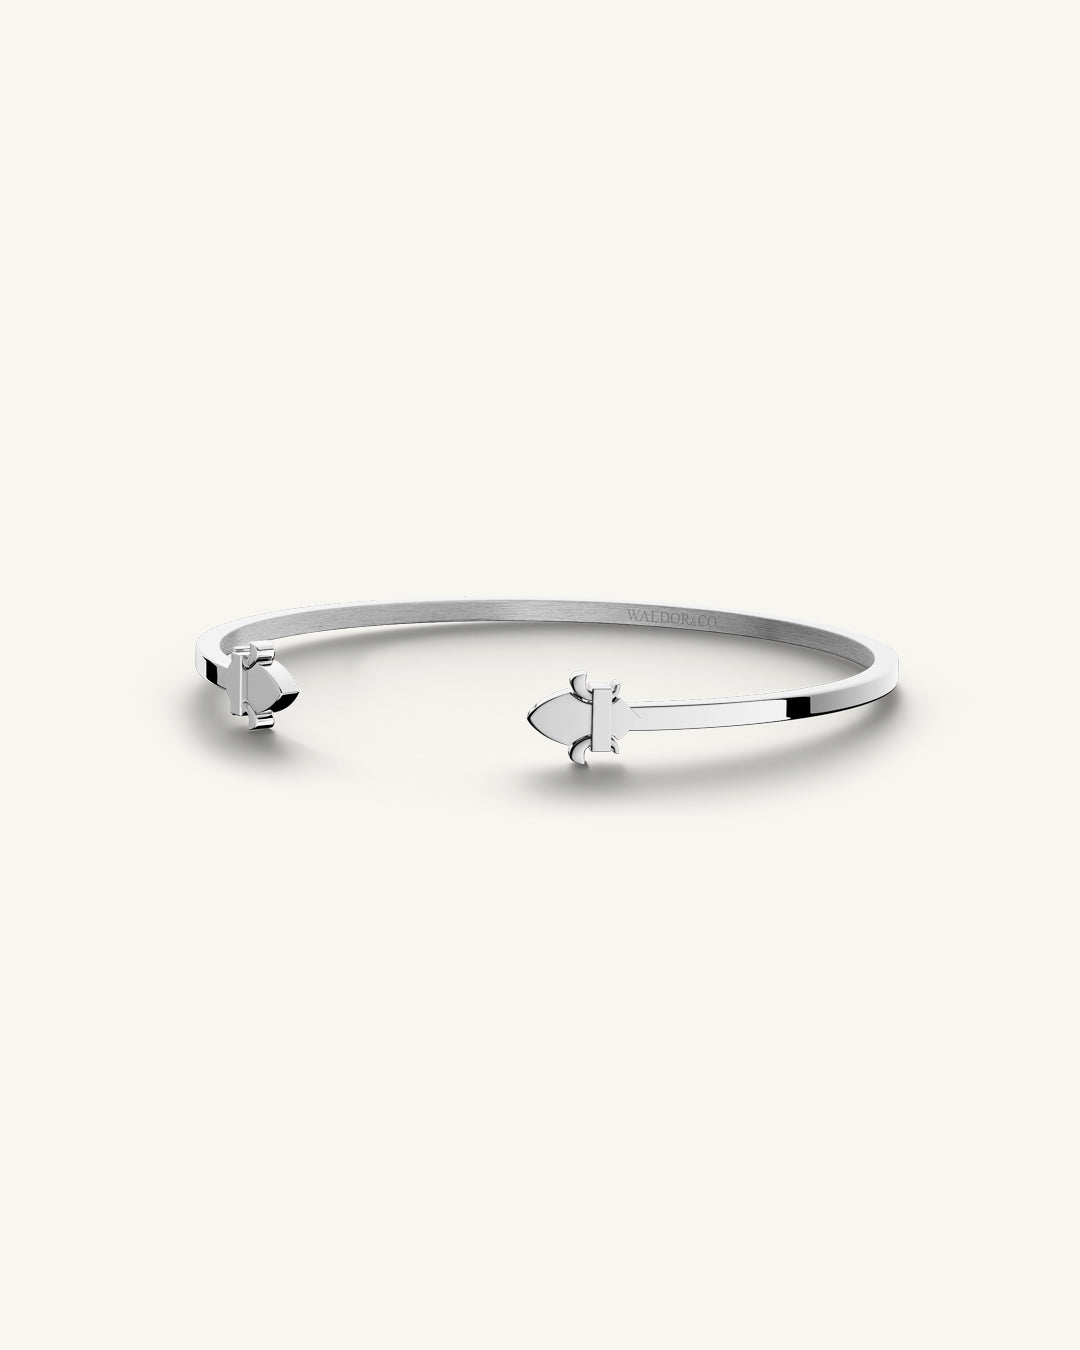 Cuff Bangle Bracelets | Solid Silver | Adjustable and Stackable